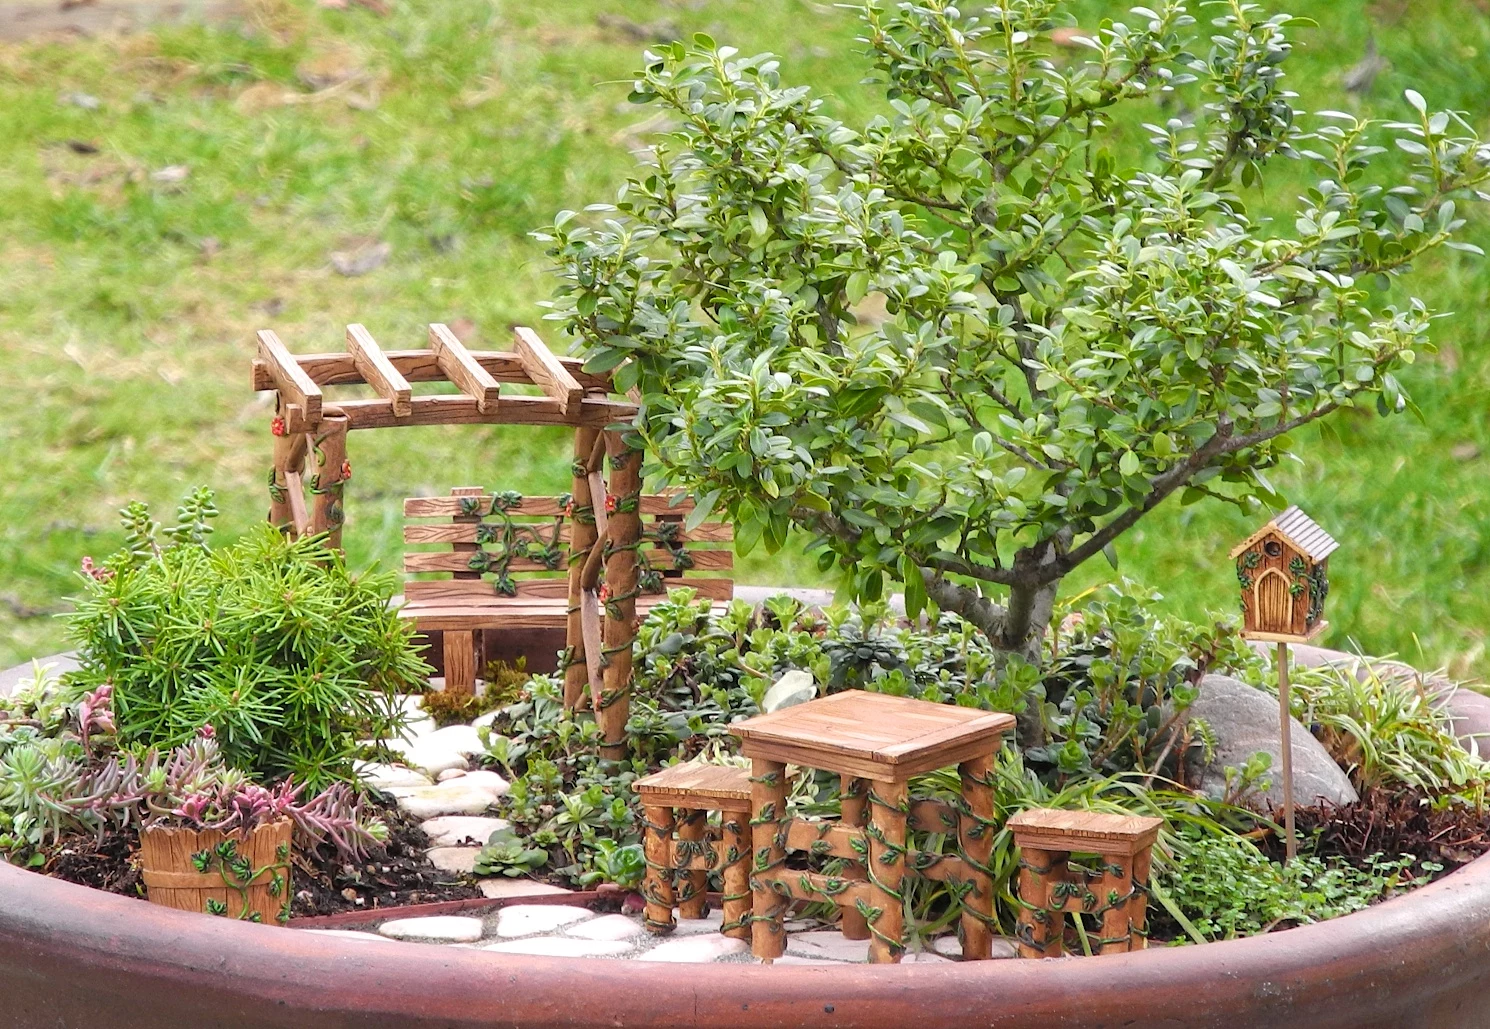 gazebo and bench, table and two stools, bucket and bird house, all made from wood-like material, in a large pot, containing pebbles and plants, and a green bonsai tree